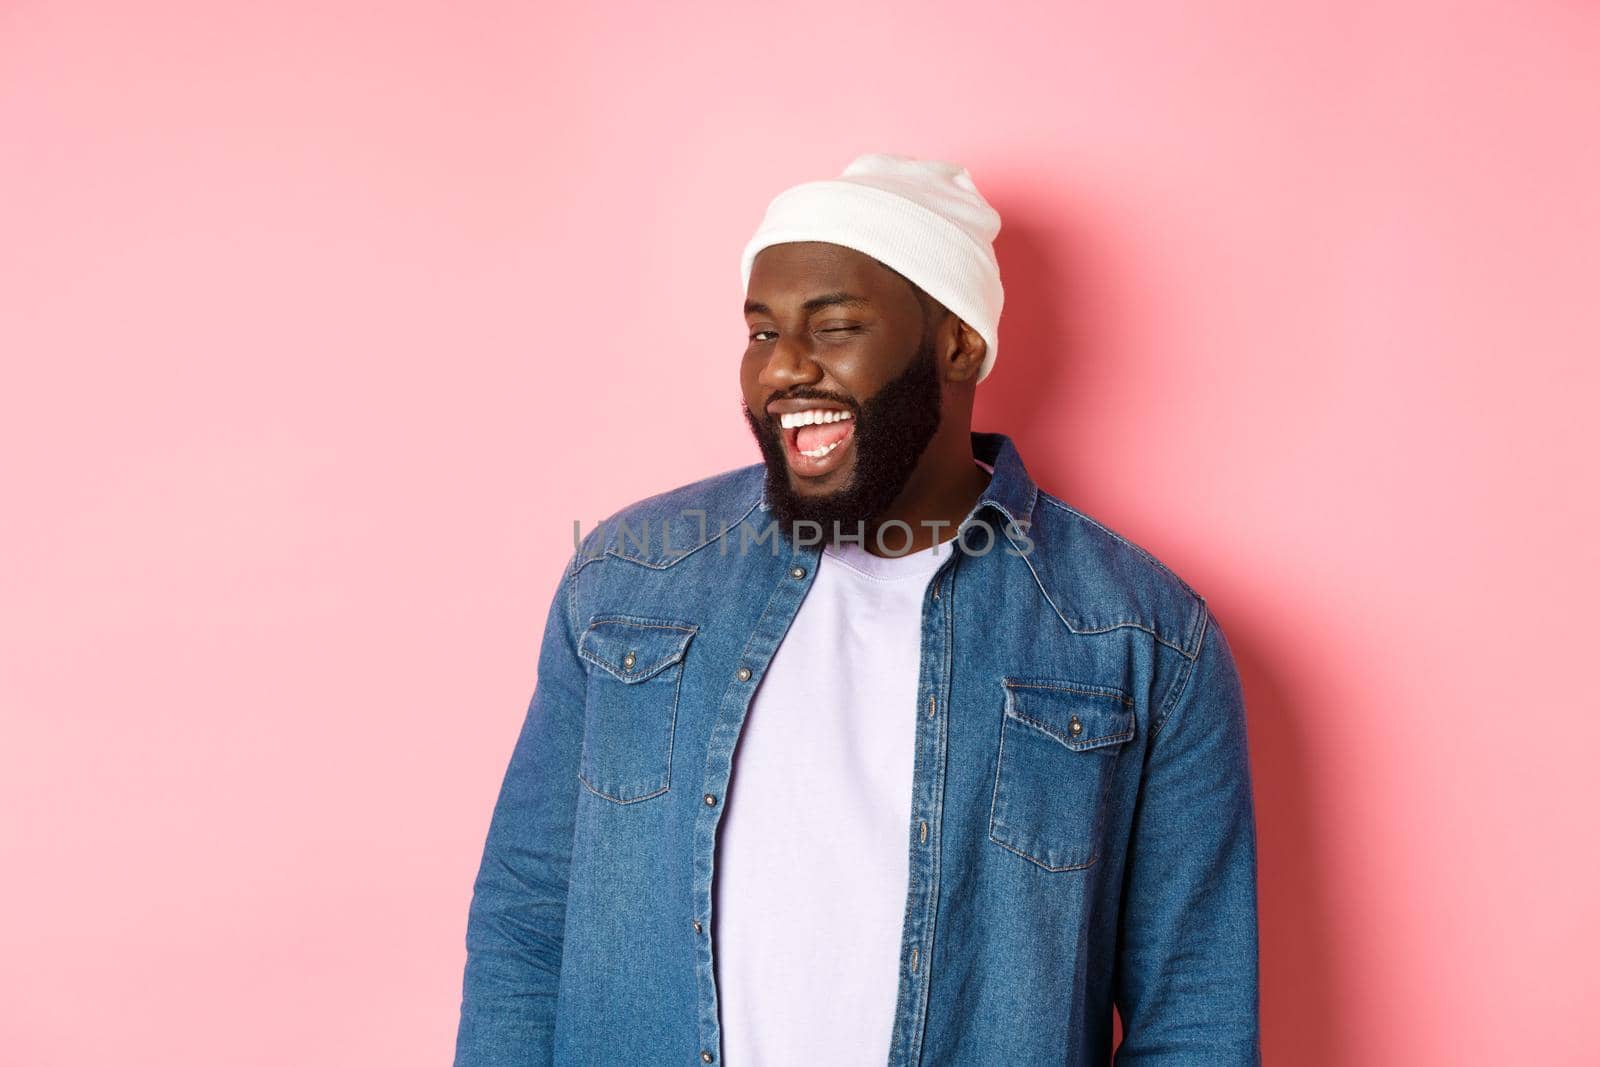 Cheeky african-american man winking at camera and smiling, teasing with offer, standing in hipster clothing against pink background.